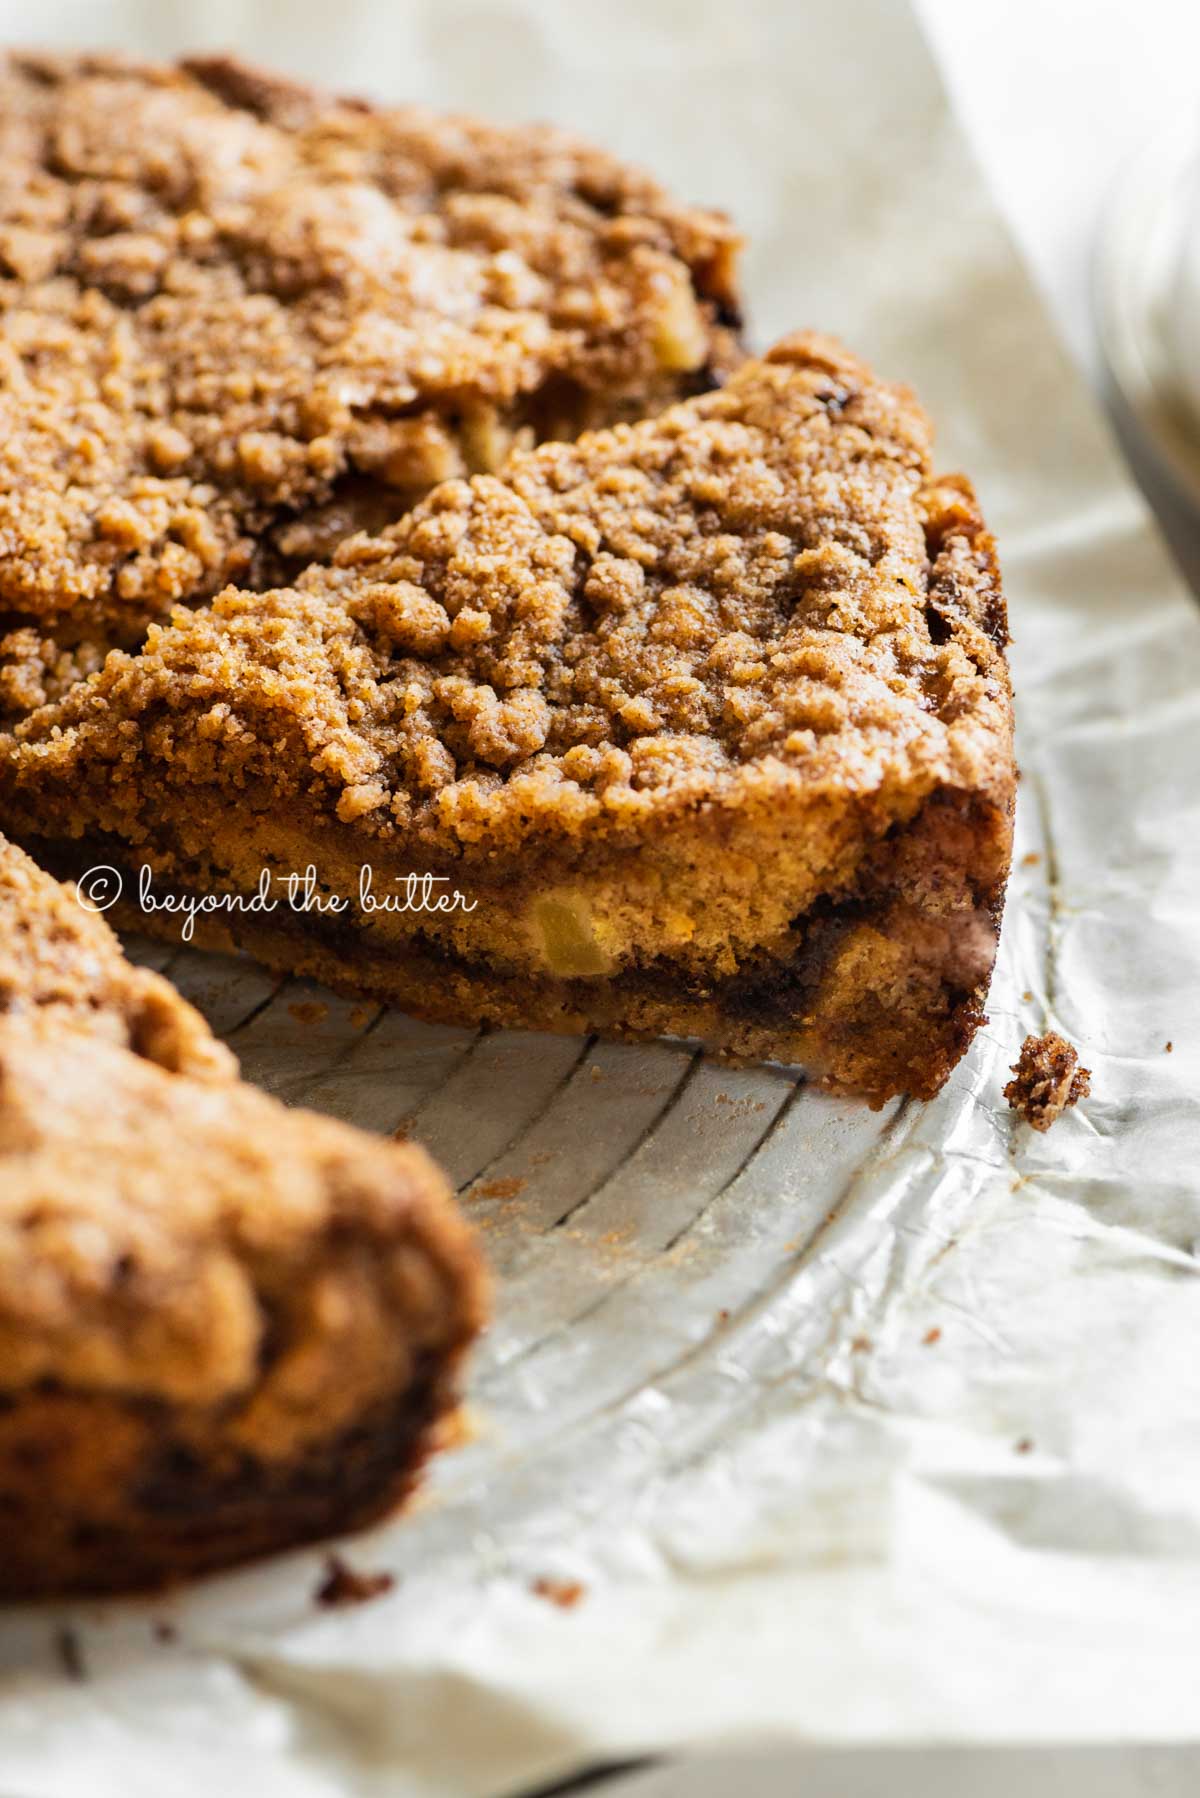 Side view of sliced cinnamon apple coffee cake | All Images © Beyond the Butter™